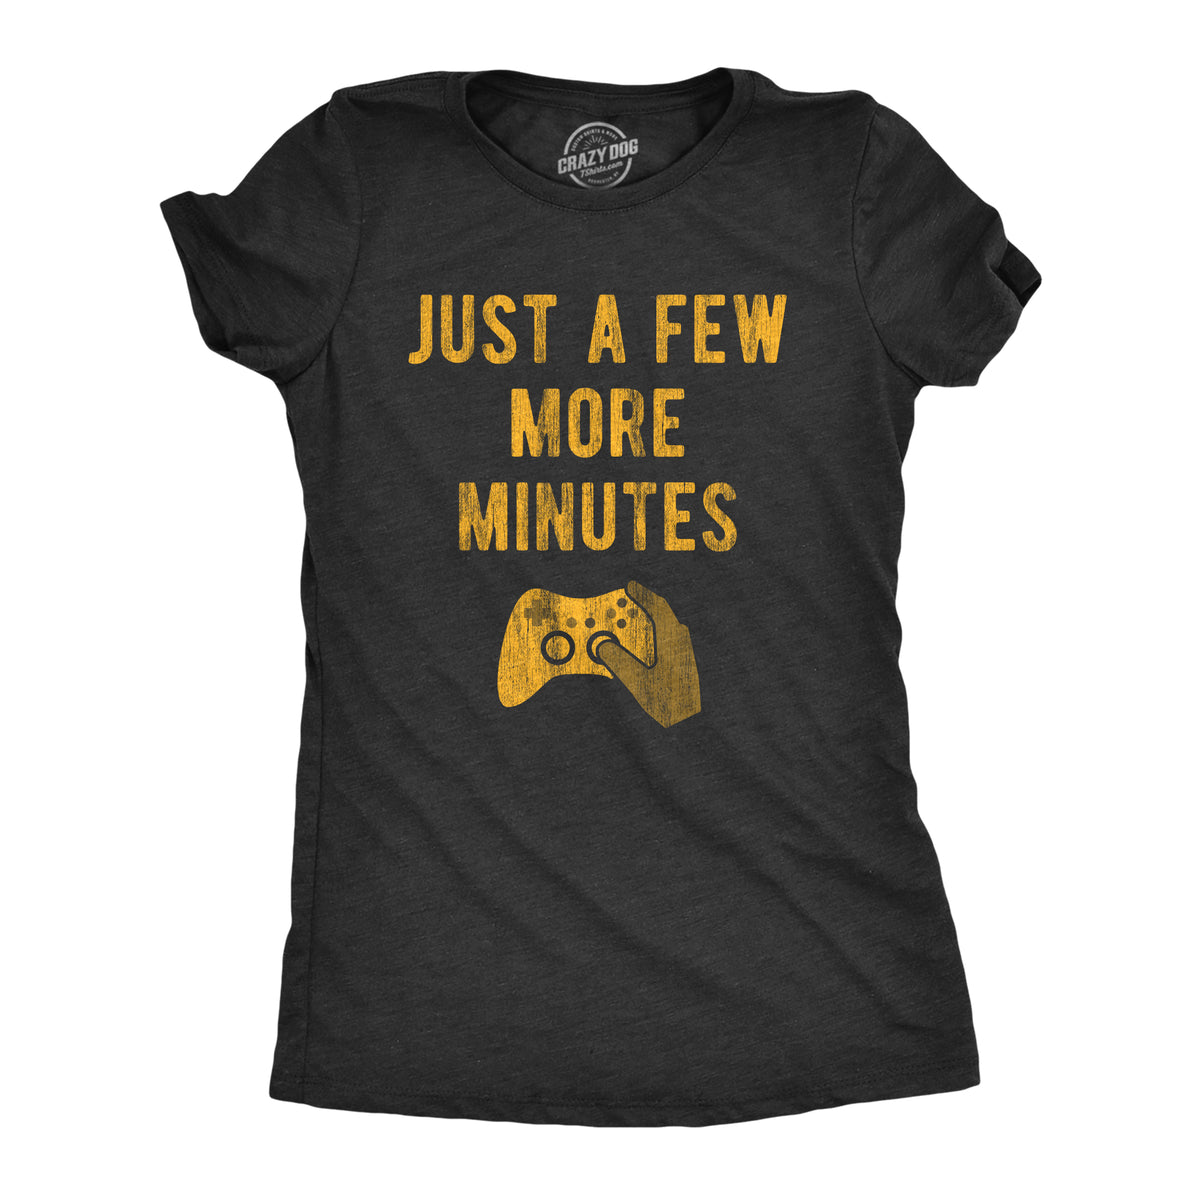 Funny Heather Black Just A Few More Minutes Womens T Shirt Nerdy Video Games Nerdy Tee